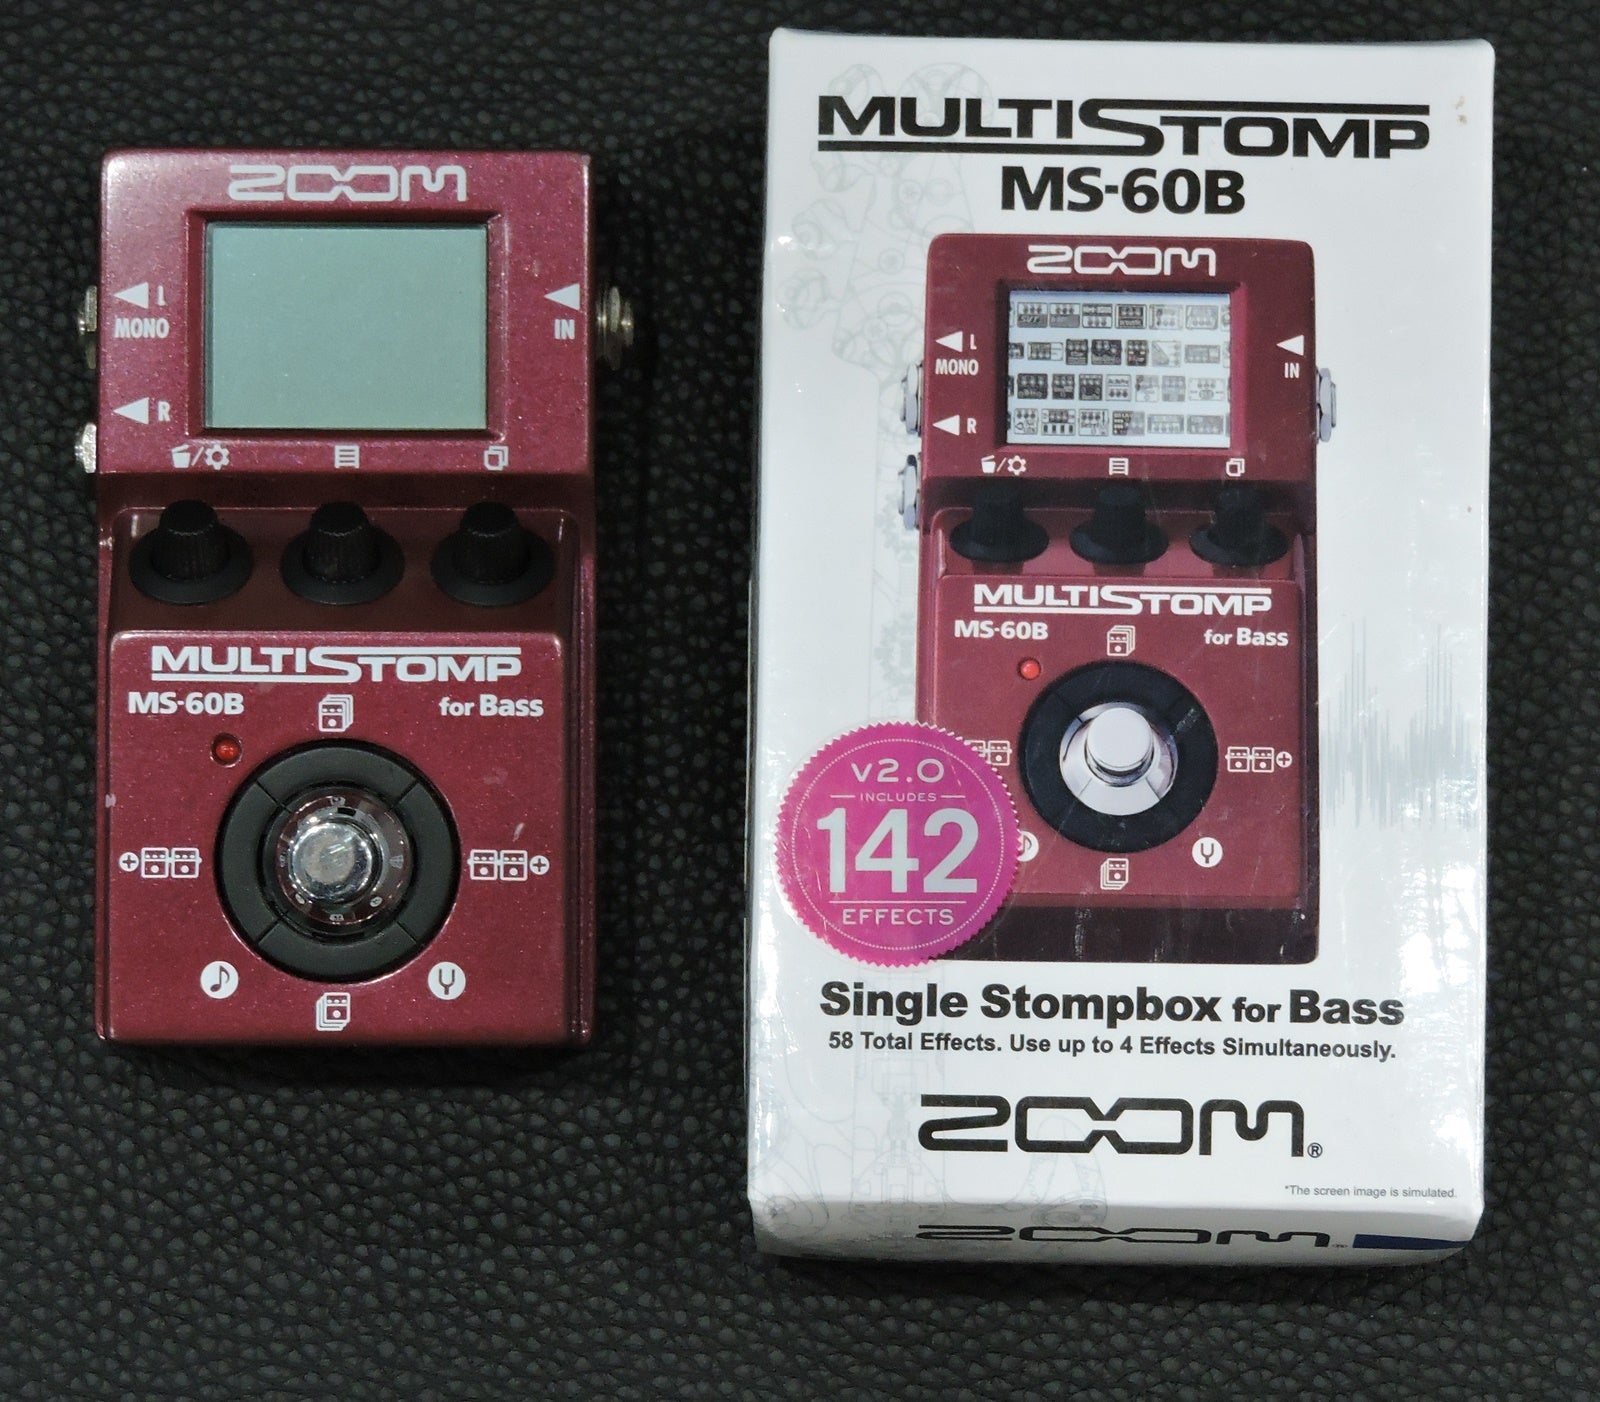 MULTI STOMP MS-60B for Bass